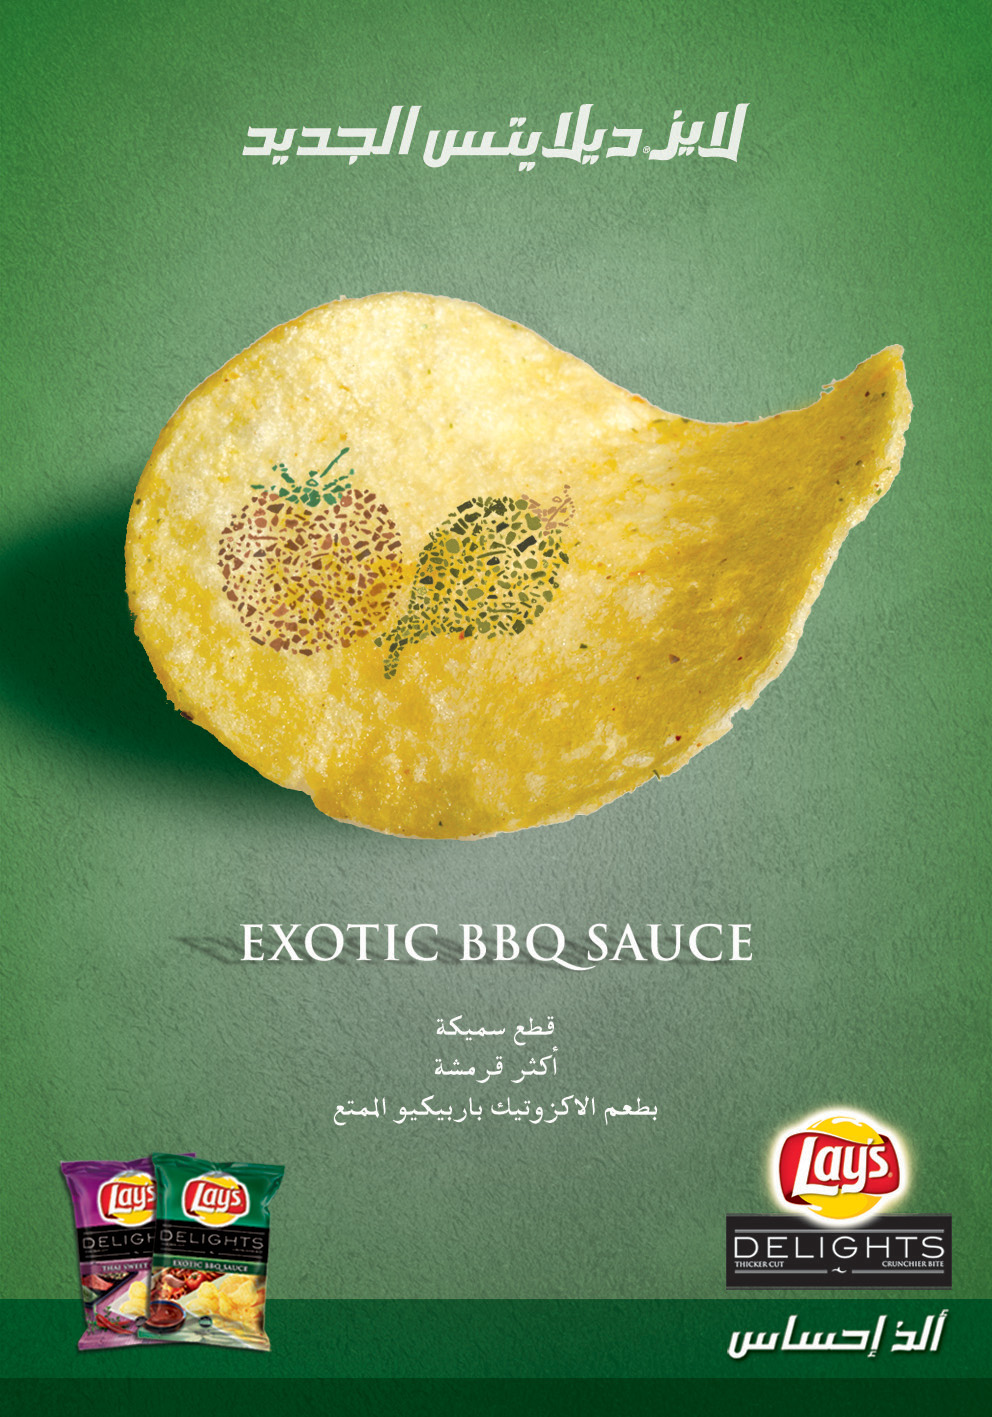 Lays lays delights potato chips press ad